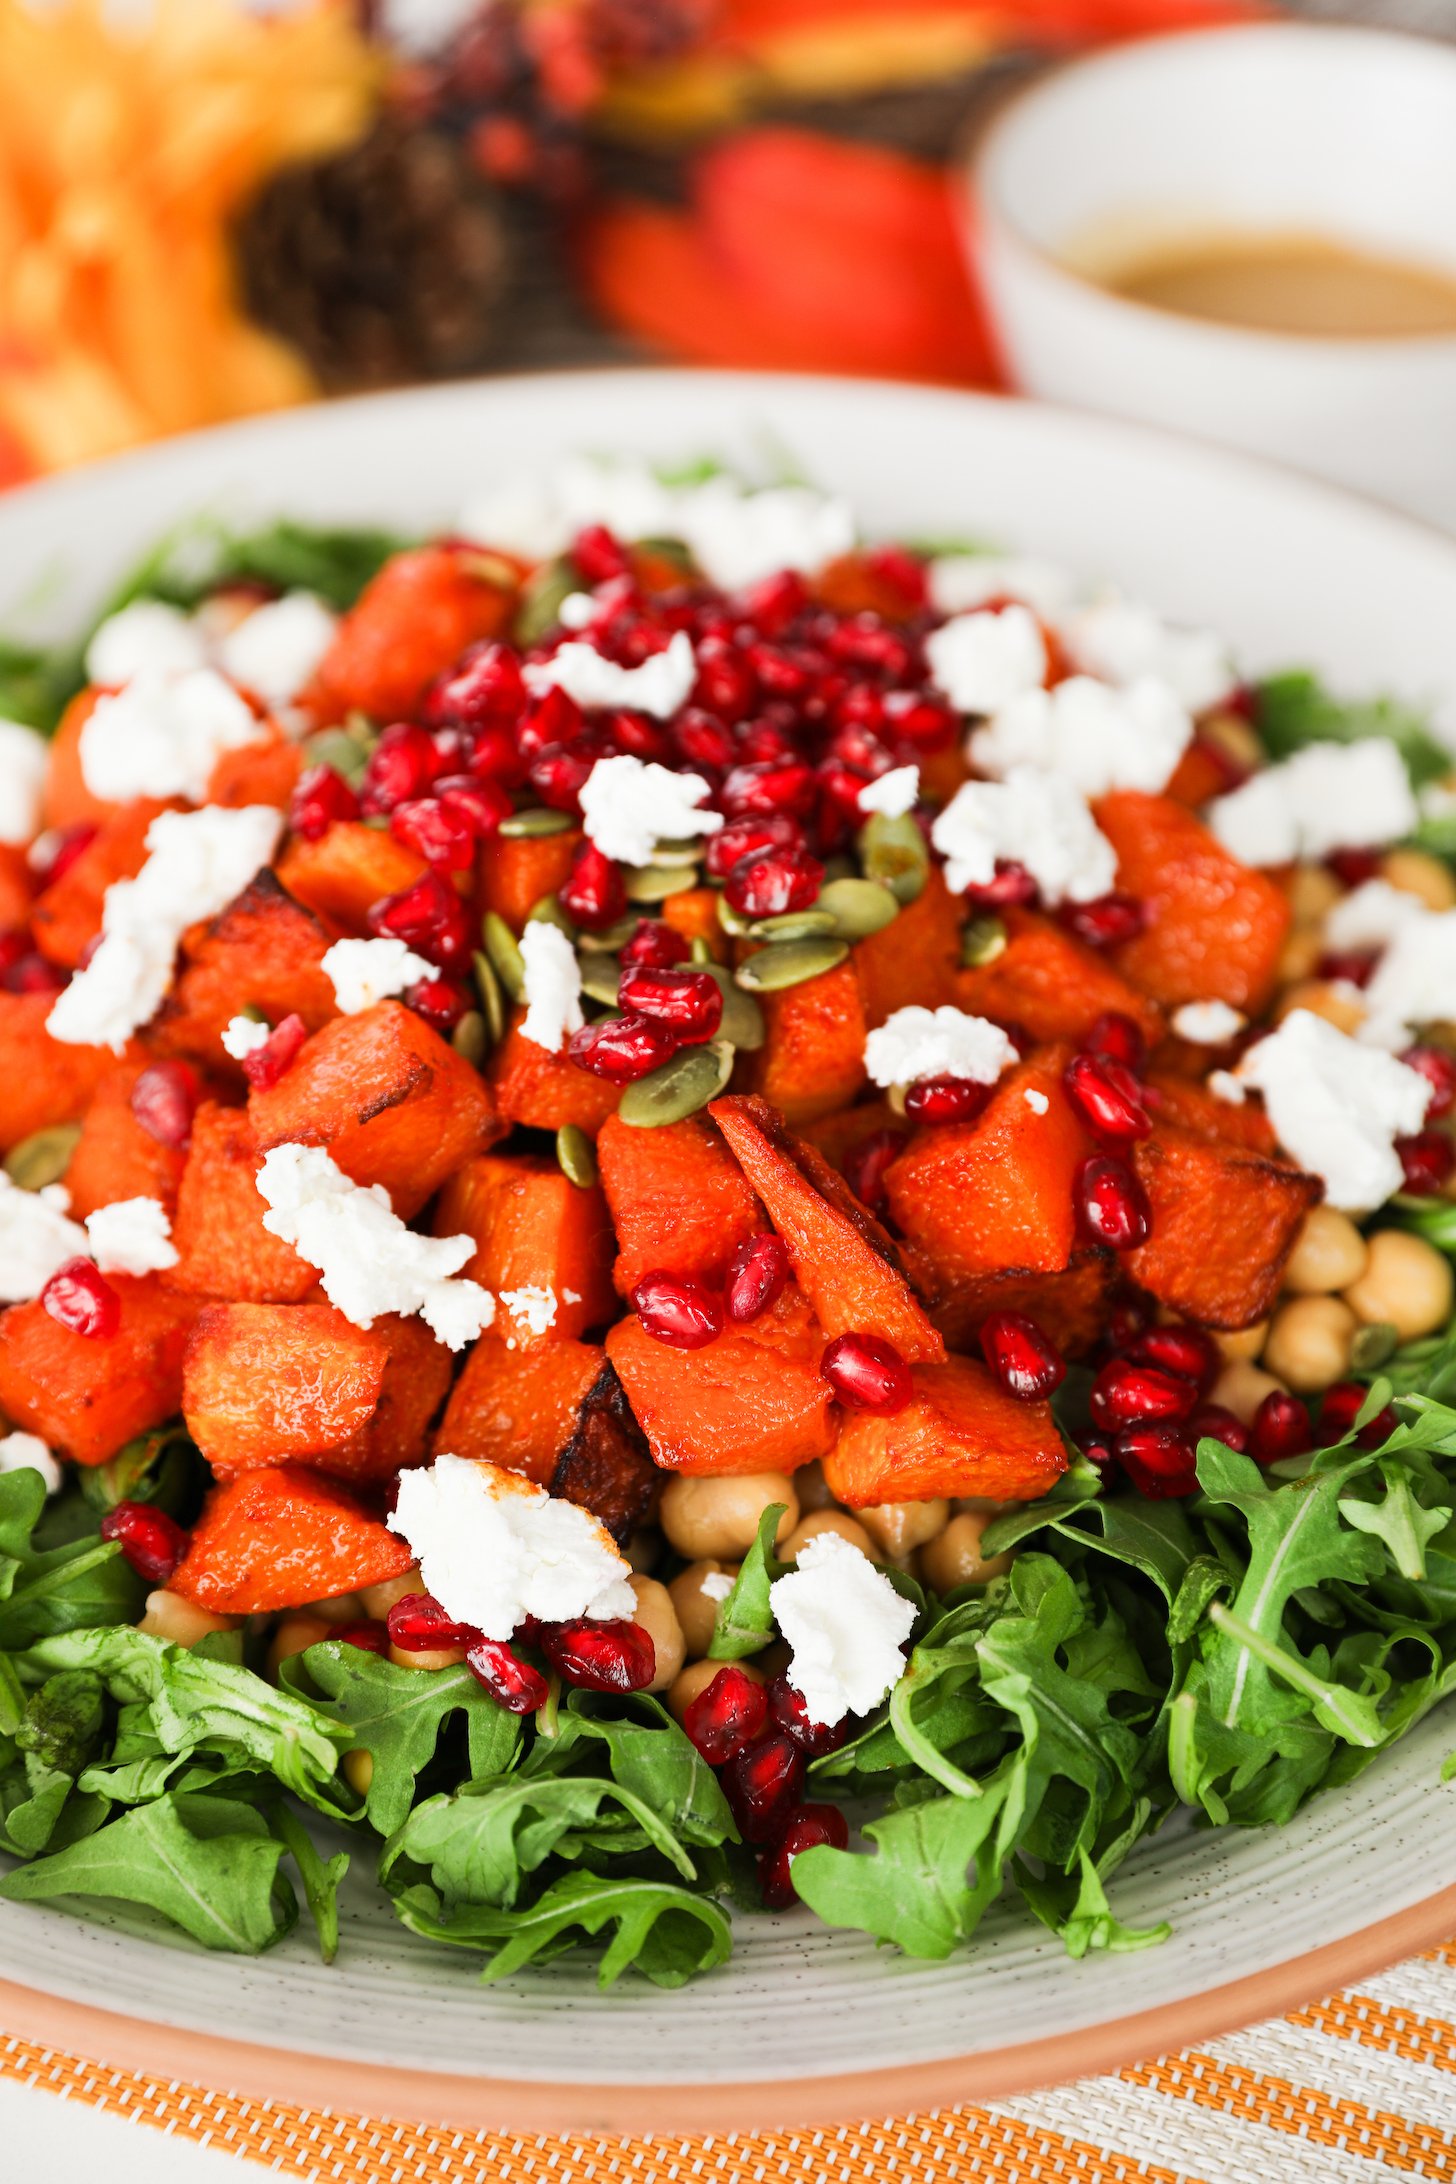 A close-up image featuring a plate of arugula topped with roasted pumpkin pieces, pomegranate kernels, seeds, and chunks of goat cheese.